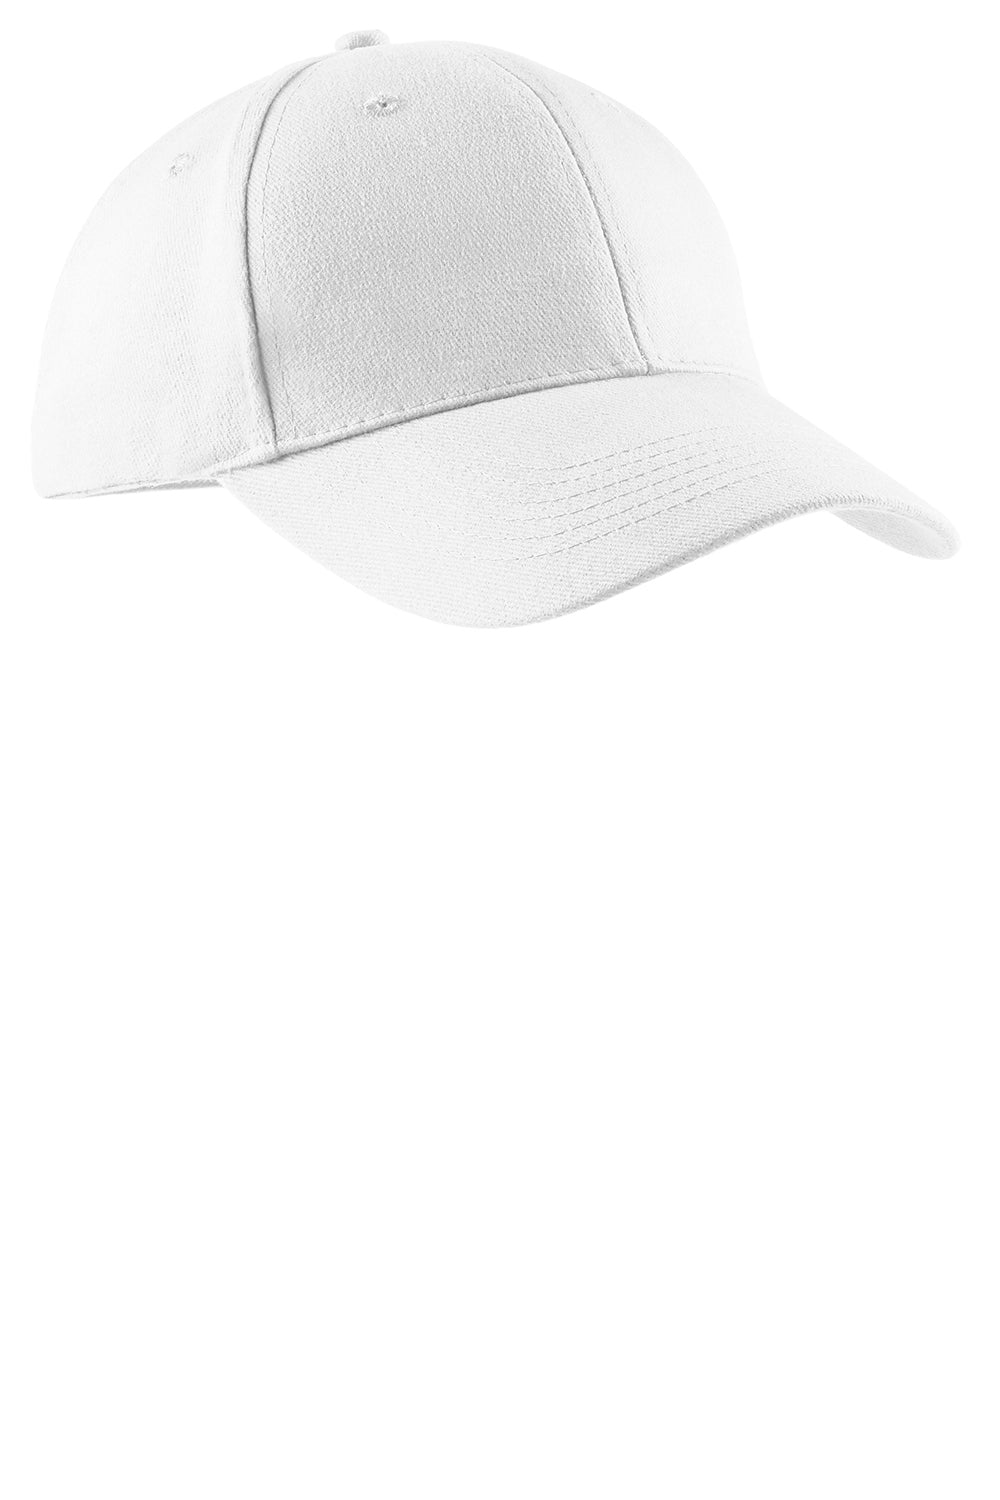 Port & Company CP82 Mens Adjustable Hat White Front